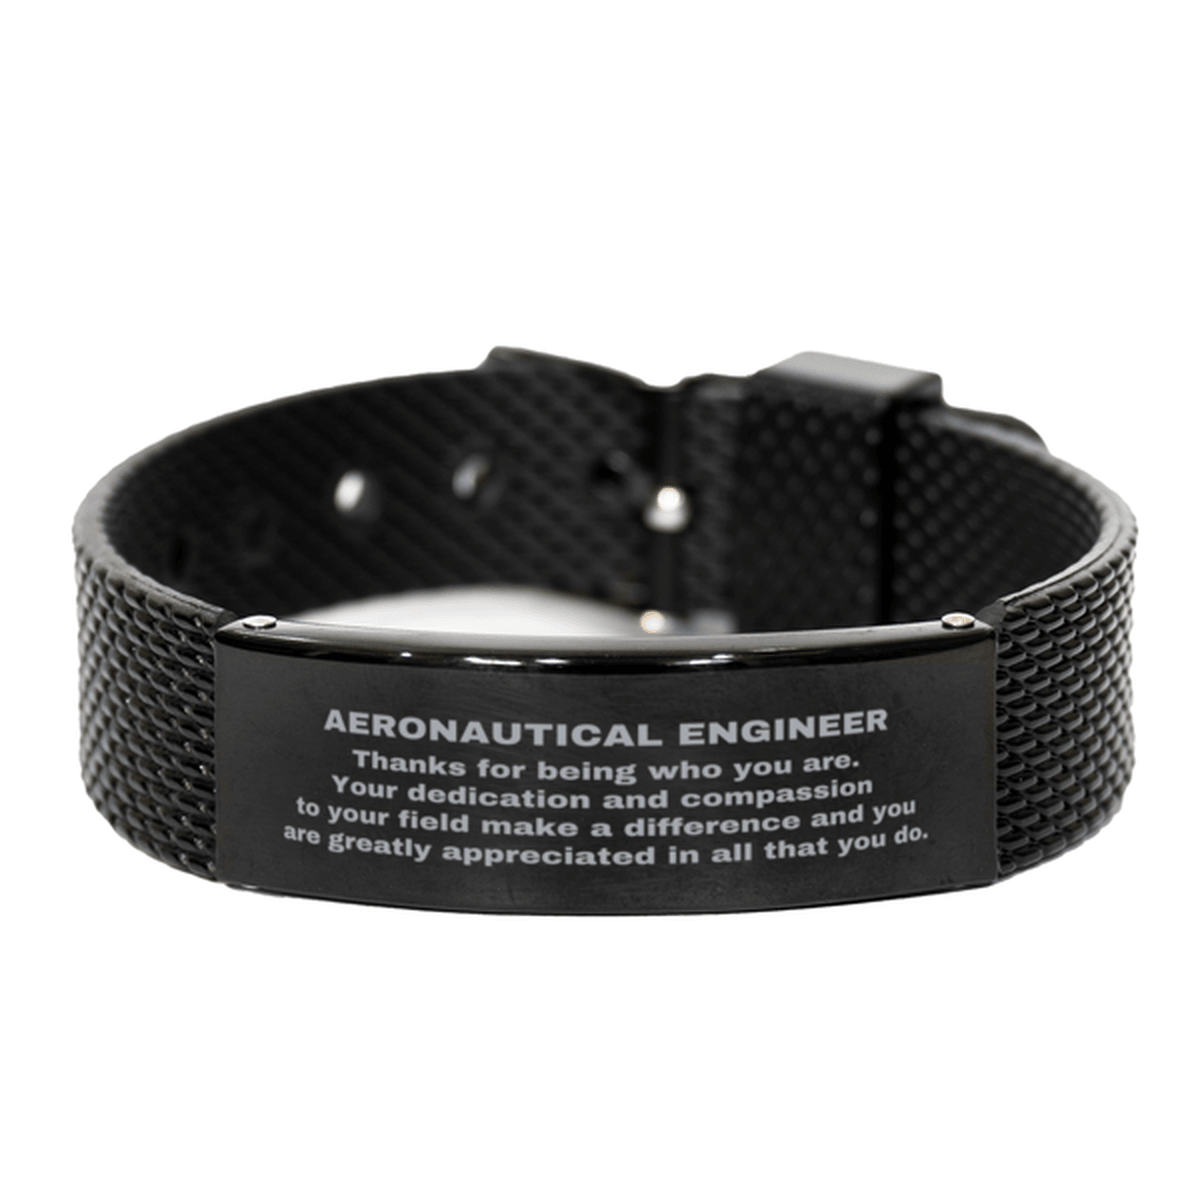 Aeronautical Engineer Black Shark Mesh Stainless Steel Engraved Bracelet - Thanks for being who you are - Birthday Christmas Jewelry Gifts Coworkers Colleague Boss - Mallard Moon Gift Shop